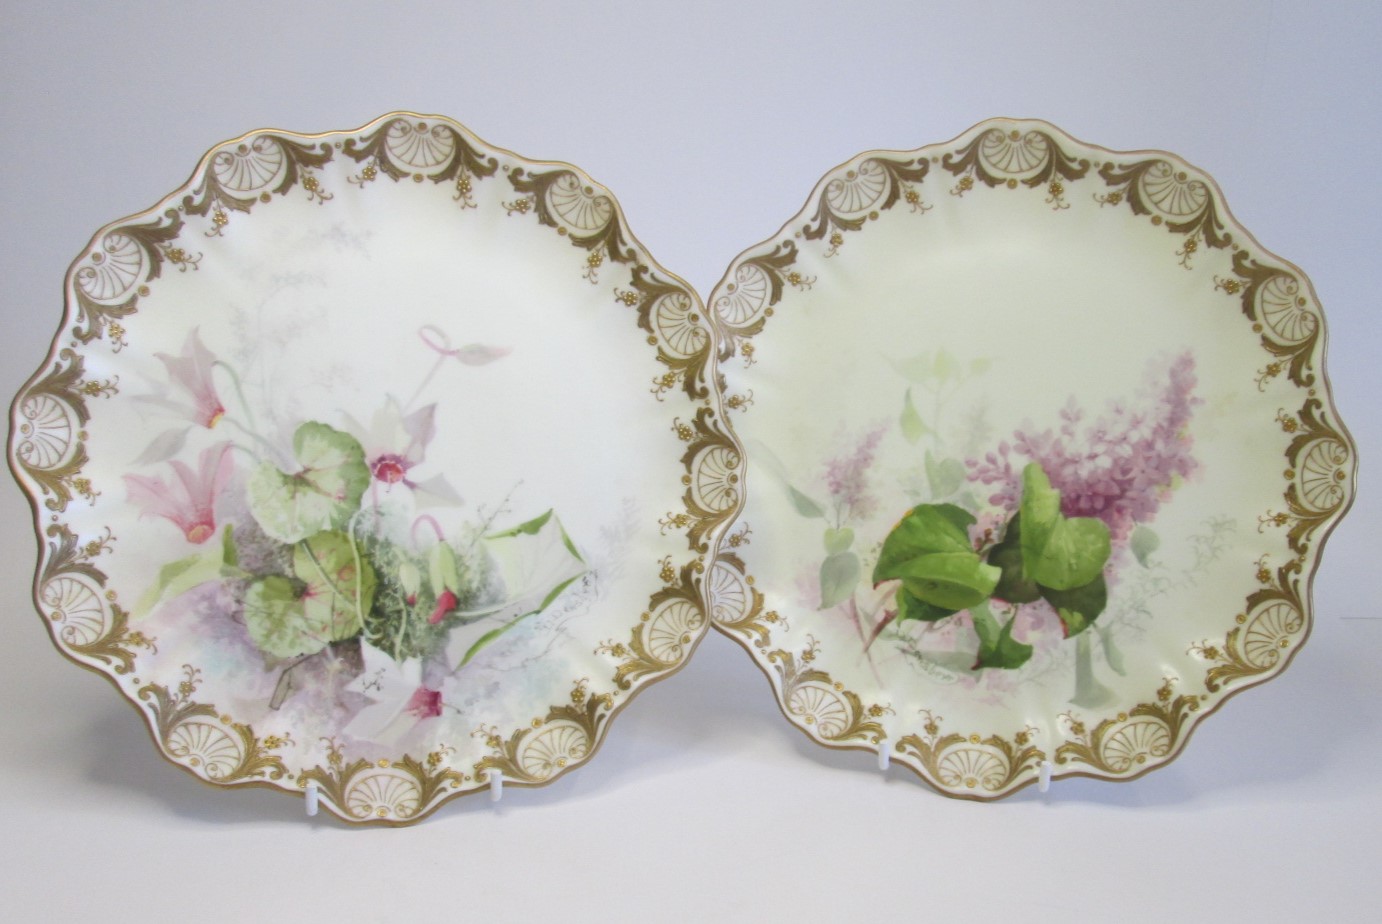 A pair of Royal Doulton, Burslem,  Rd No 72067 gold gilt scalloped plates hand painted and signed by